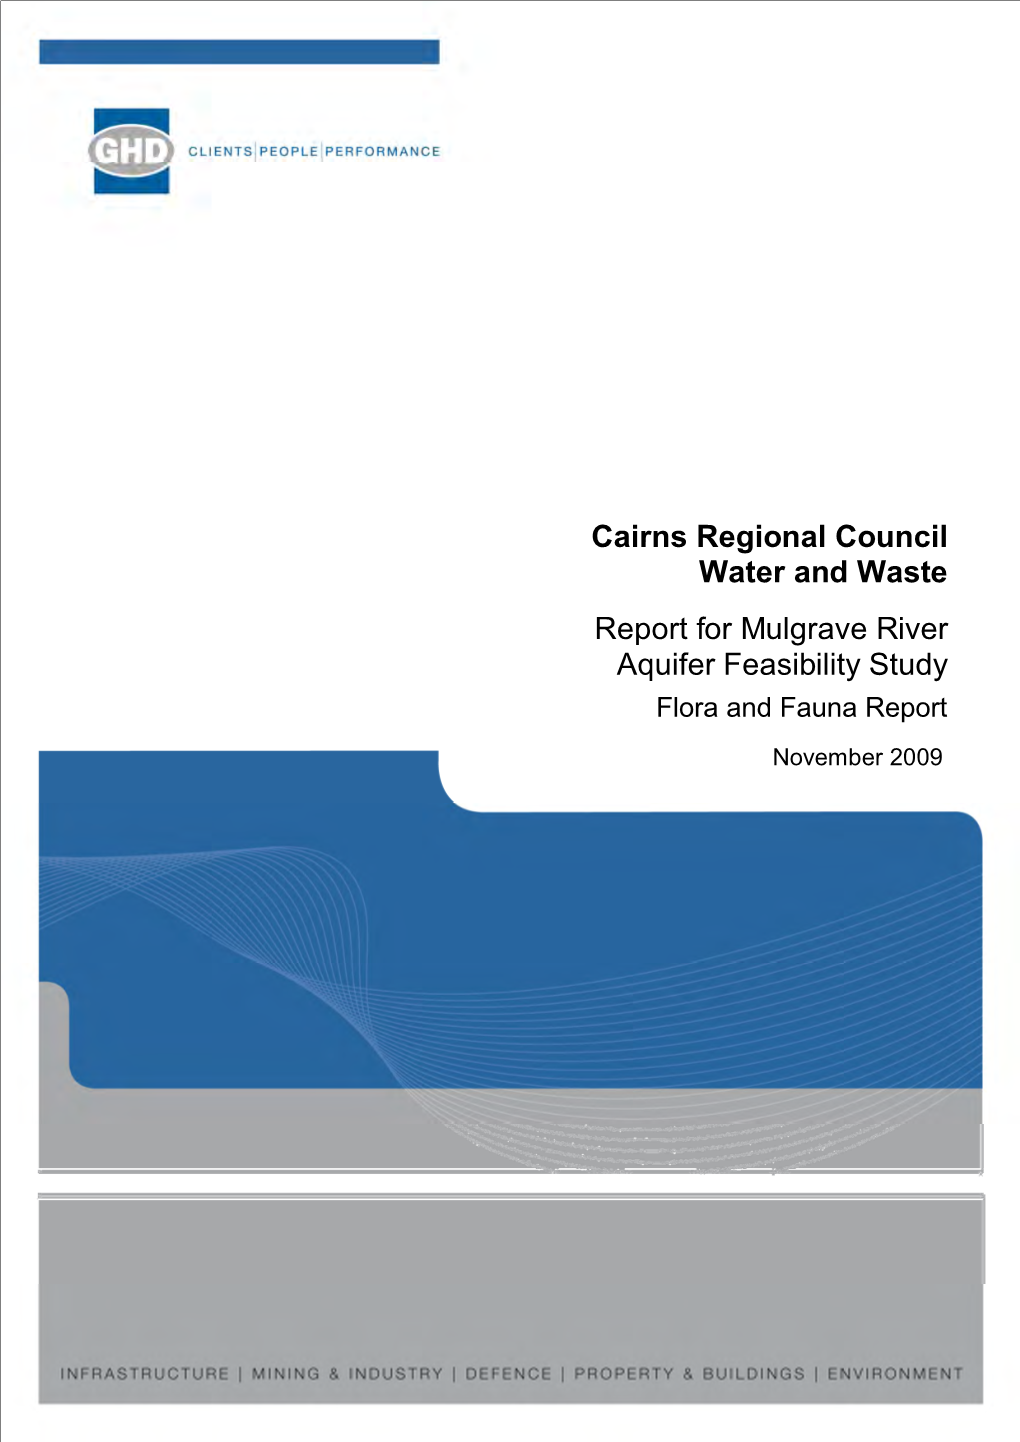 Cairns Regional Council Water and Waste Report for Mulgrave River Aquifer Feasibility Study Flora and Fauna Report